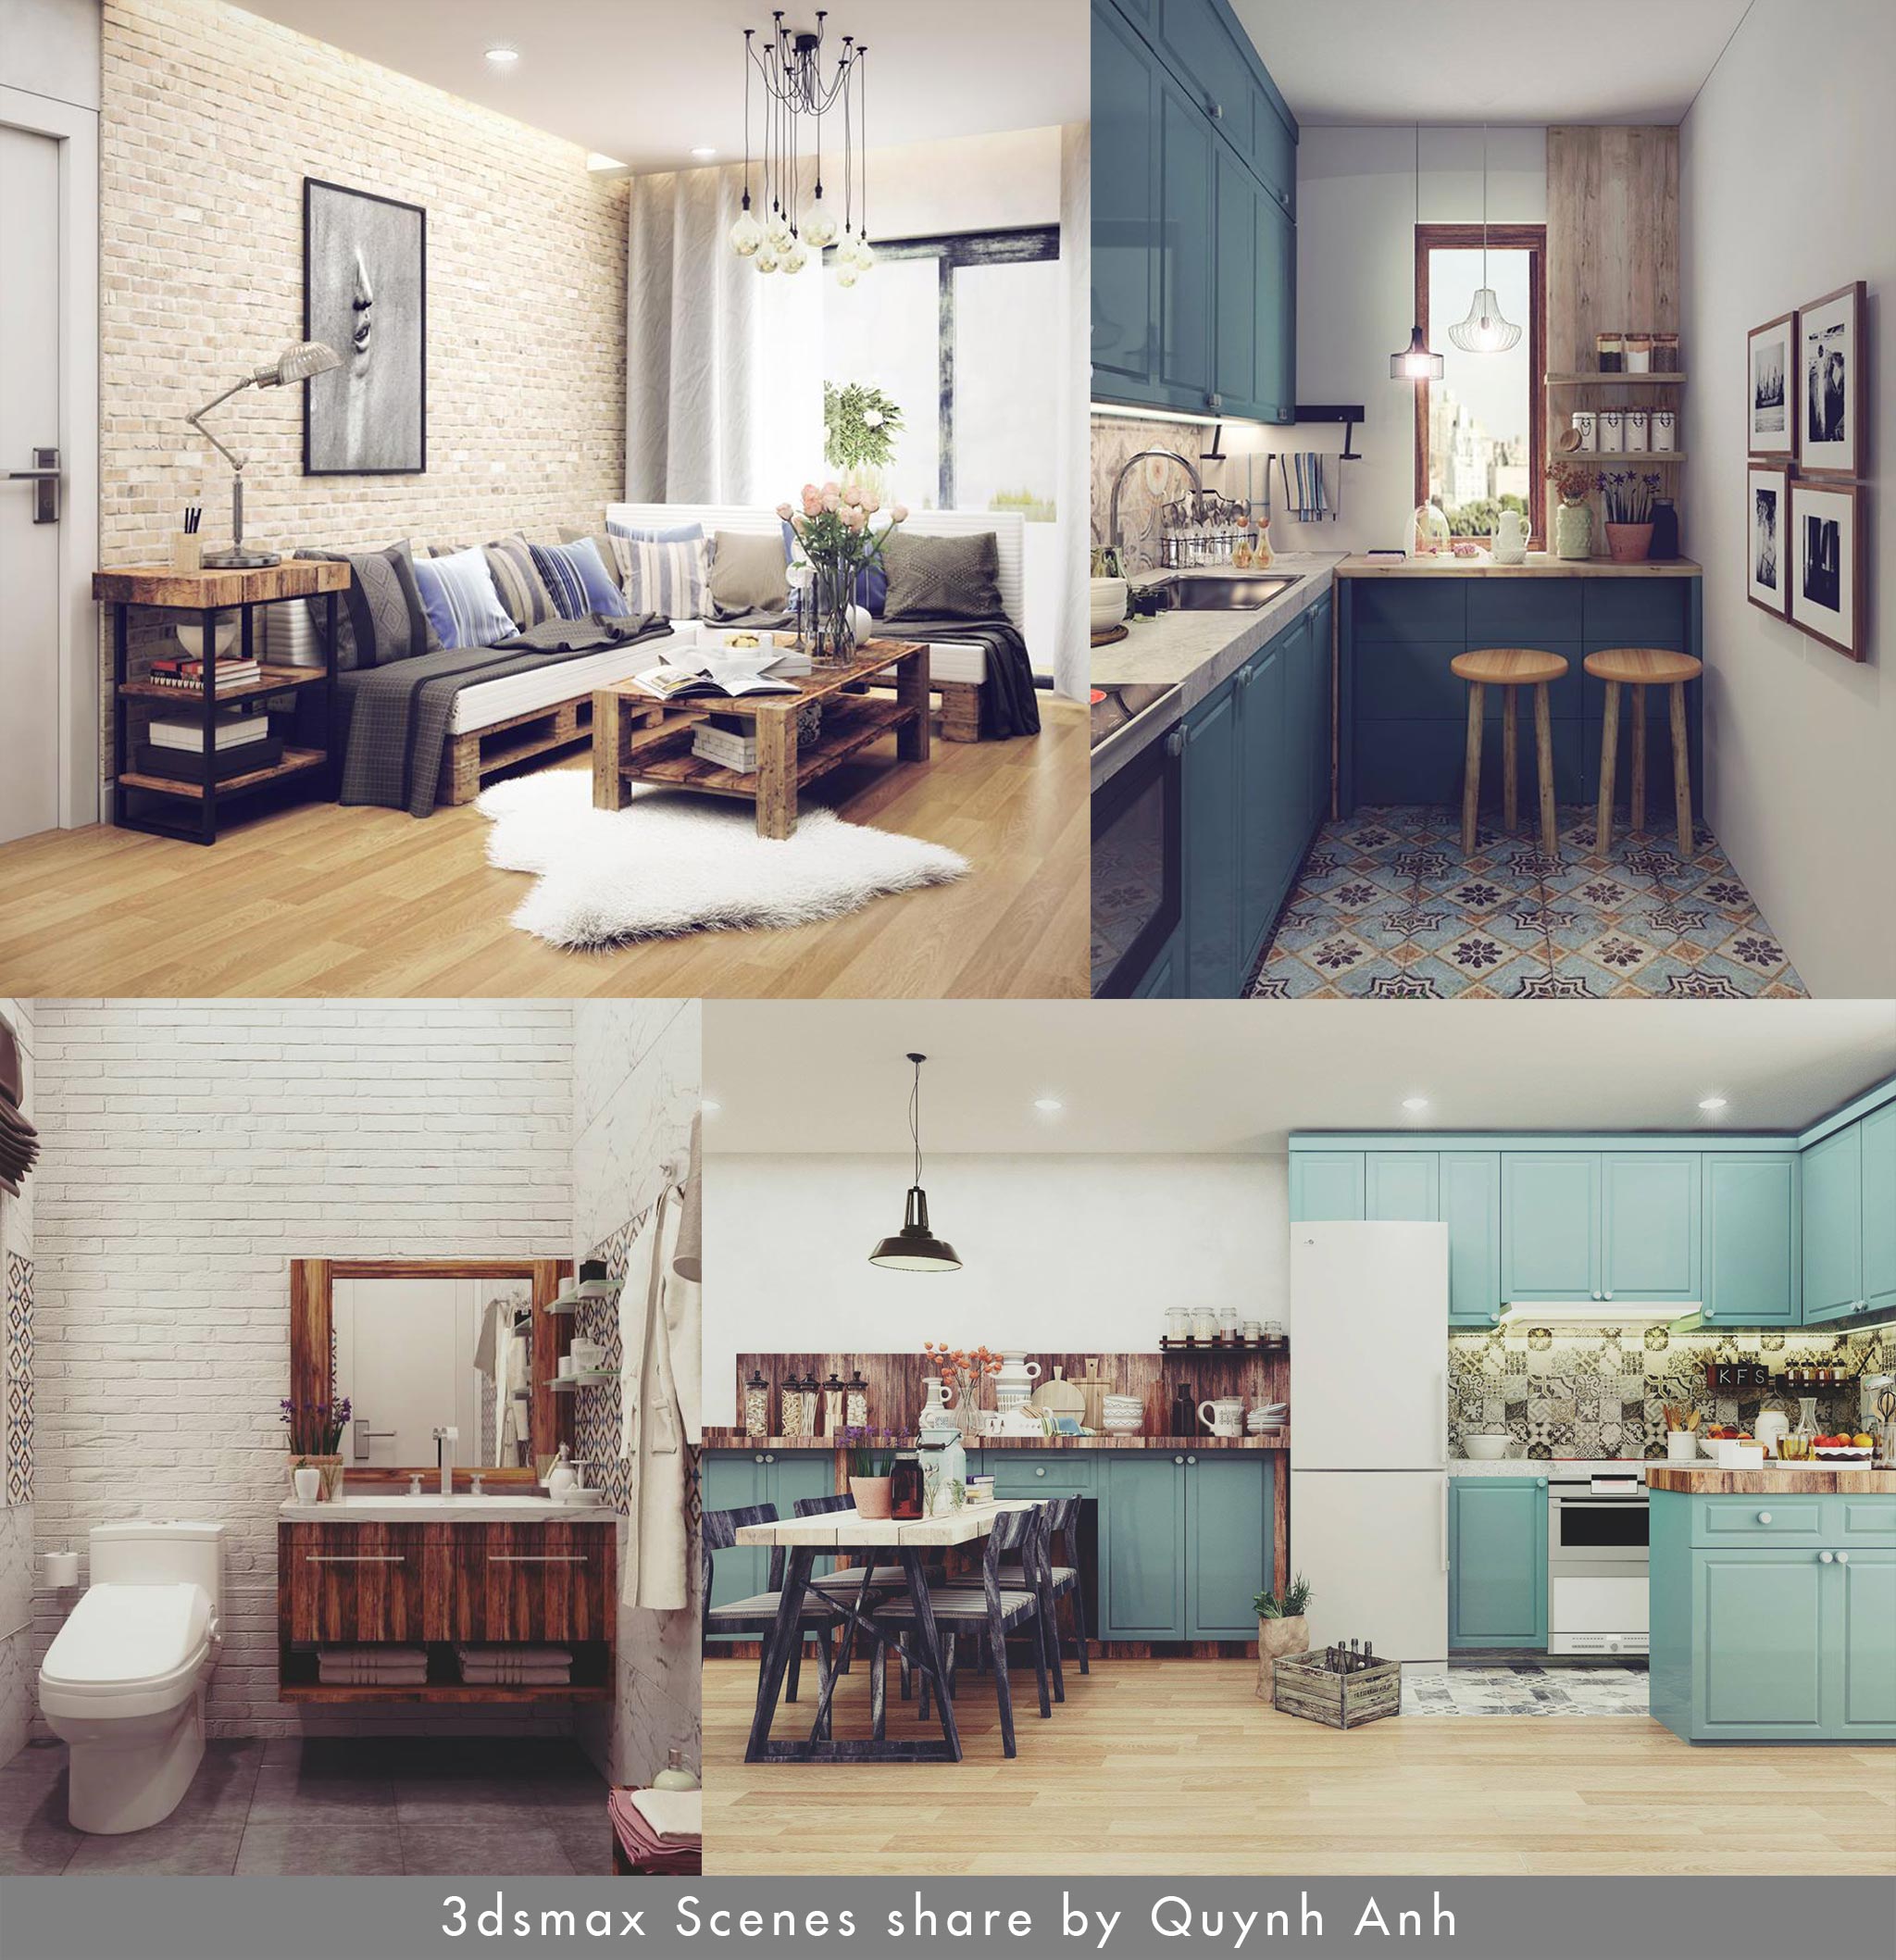 [Scenes] 3dsmax Scenes share by Quynh Anh